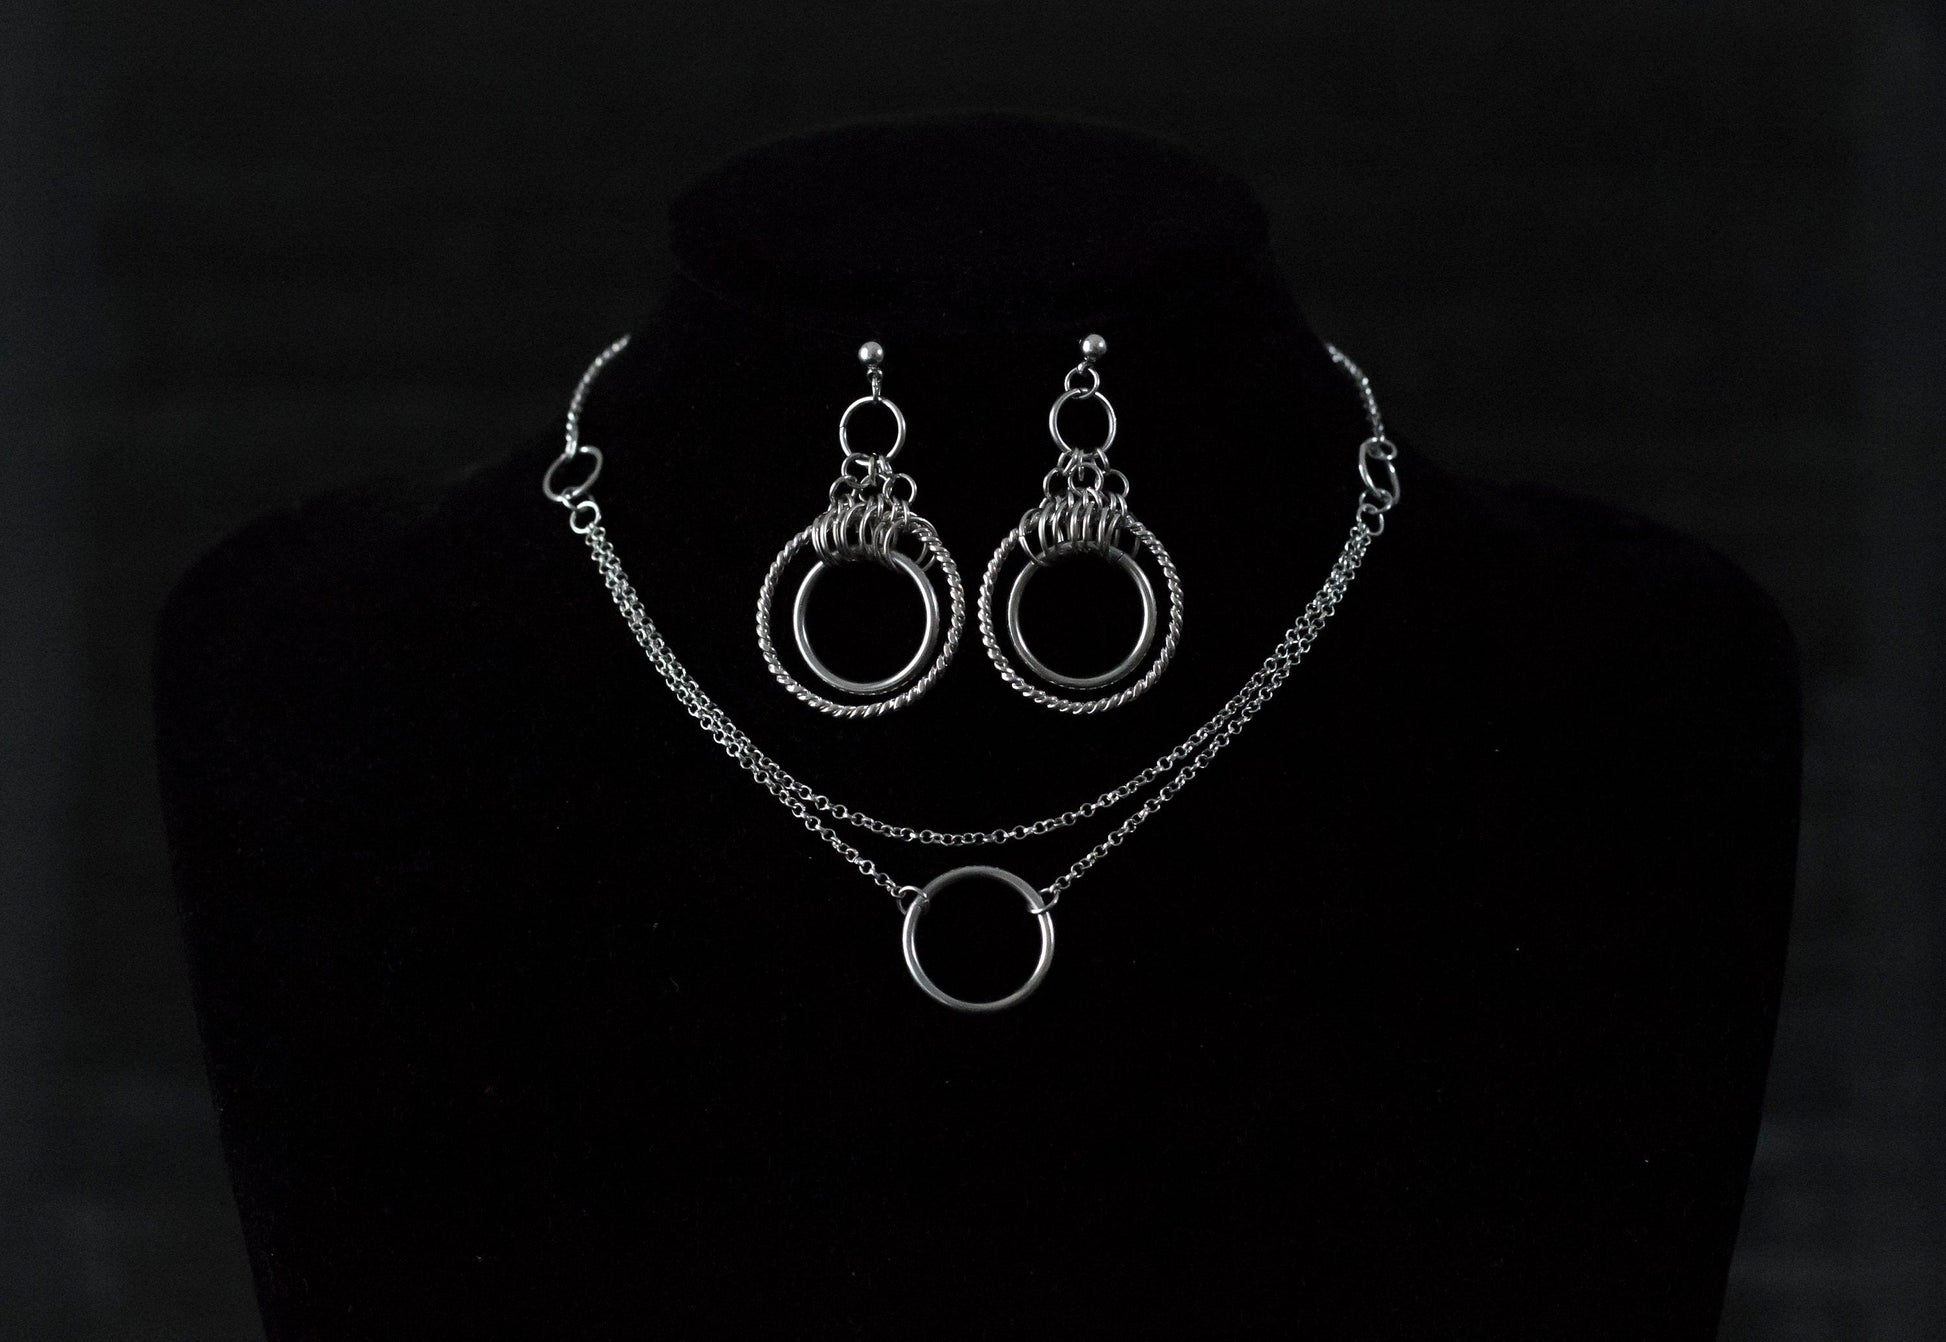  The image presents a striking set of double hoop earrings and a matching o-ring chain necklace displayed on a dark mannequin. The jewelry is characterized by its gleaming silver finish, accentuating a bold gothic design that captures the avant-garde essence of Myril Jewels. This set exemplifies the brand's dedication to crafting accessories for those who embrace a dark, gothic aesthetic, and it resonates with the themes of punk jewelry and neo-gothic style.